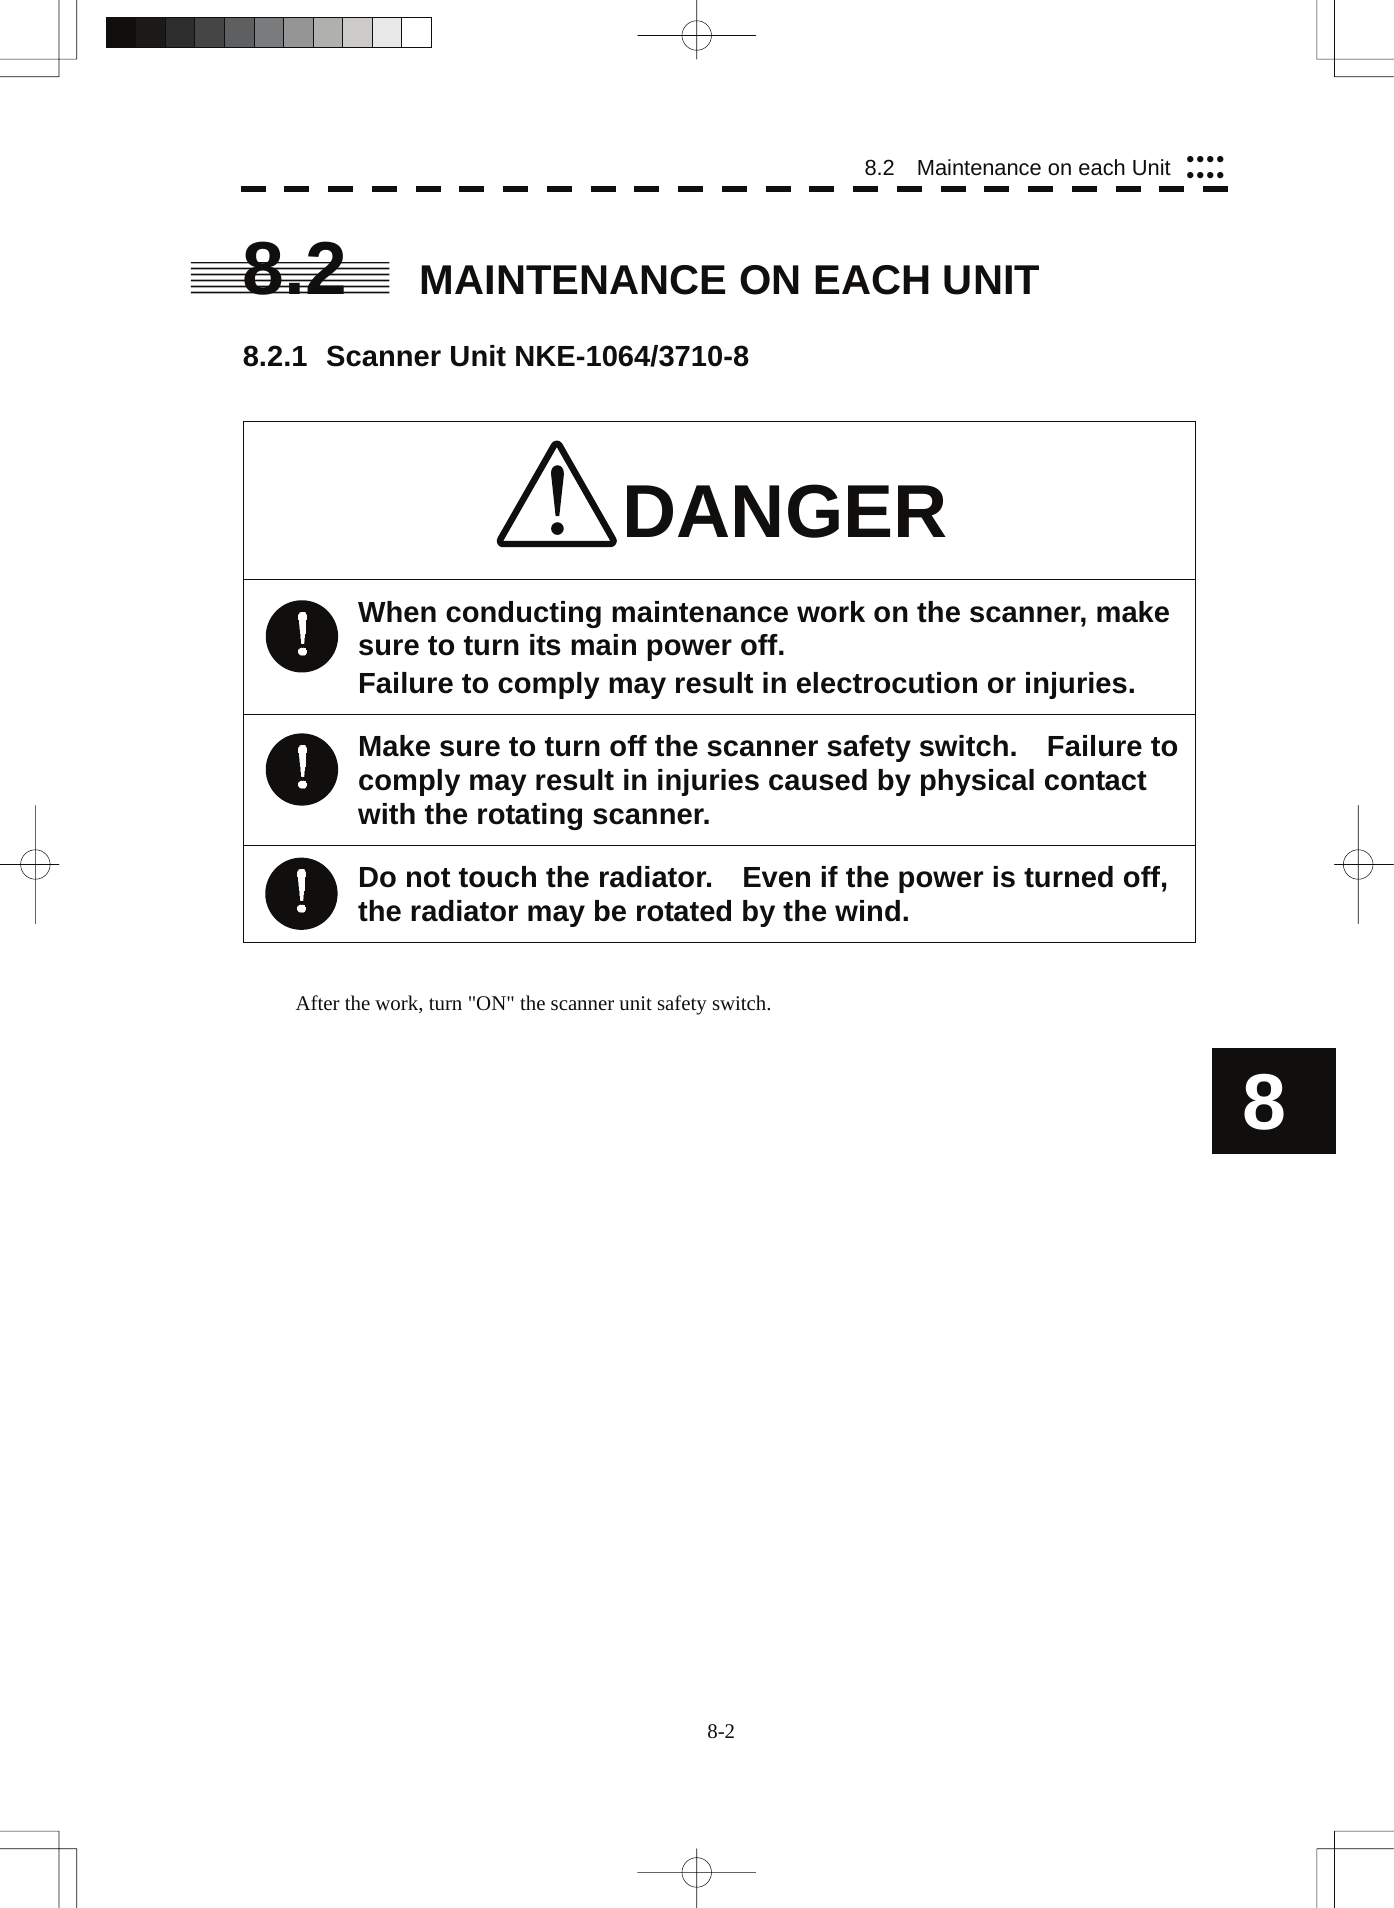  8-2 8.2    Maintenance on each Unit yyyyyyyy8 8.2  MAINTENANCE ON EACH UNIT  8.2.1 Scanner Unit NKE-1064/3710-8   DANGER When conducting maintenance work on the scanner, make sure to turn its main power off. Failure to comply may result in electrocution or injuries. Make sure to turn off the scanner safety switch.    Failure to comply may result in injuries caused by physical contact with the rotating scanner. Do not touch the radiator.    Even if the power is turned off, the radiator may be rotated by the wind.   After the work, turn &quot;ON&quot; the scanner unit safety switch. 